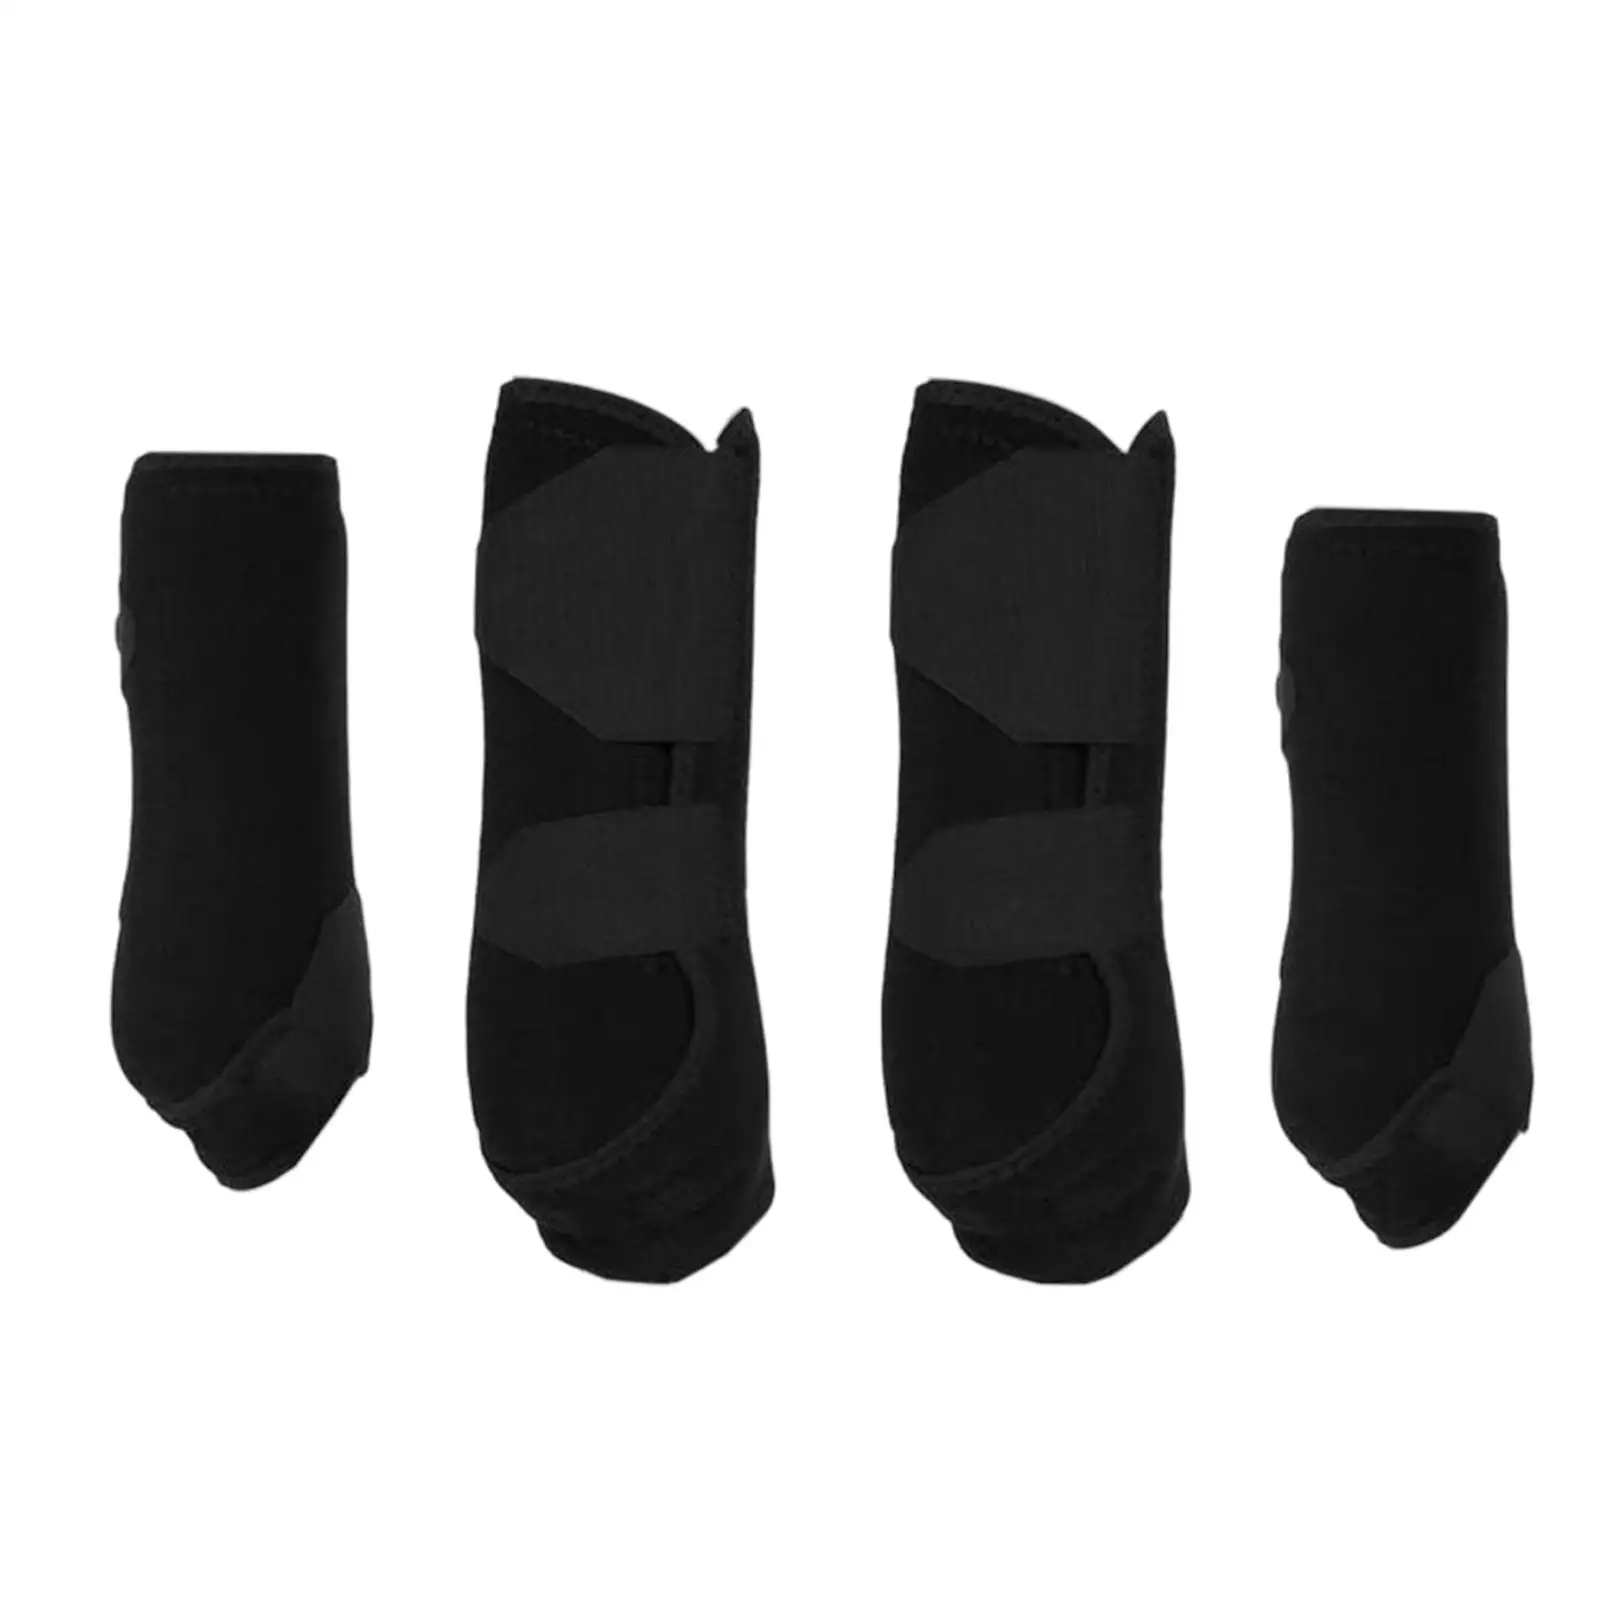 4Pcs Neoprene Horse Boots Leg Wraps Shock Absorbing Protector Guard for Jumping